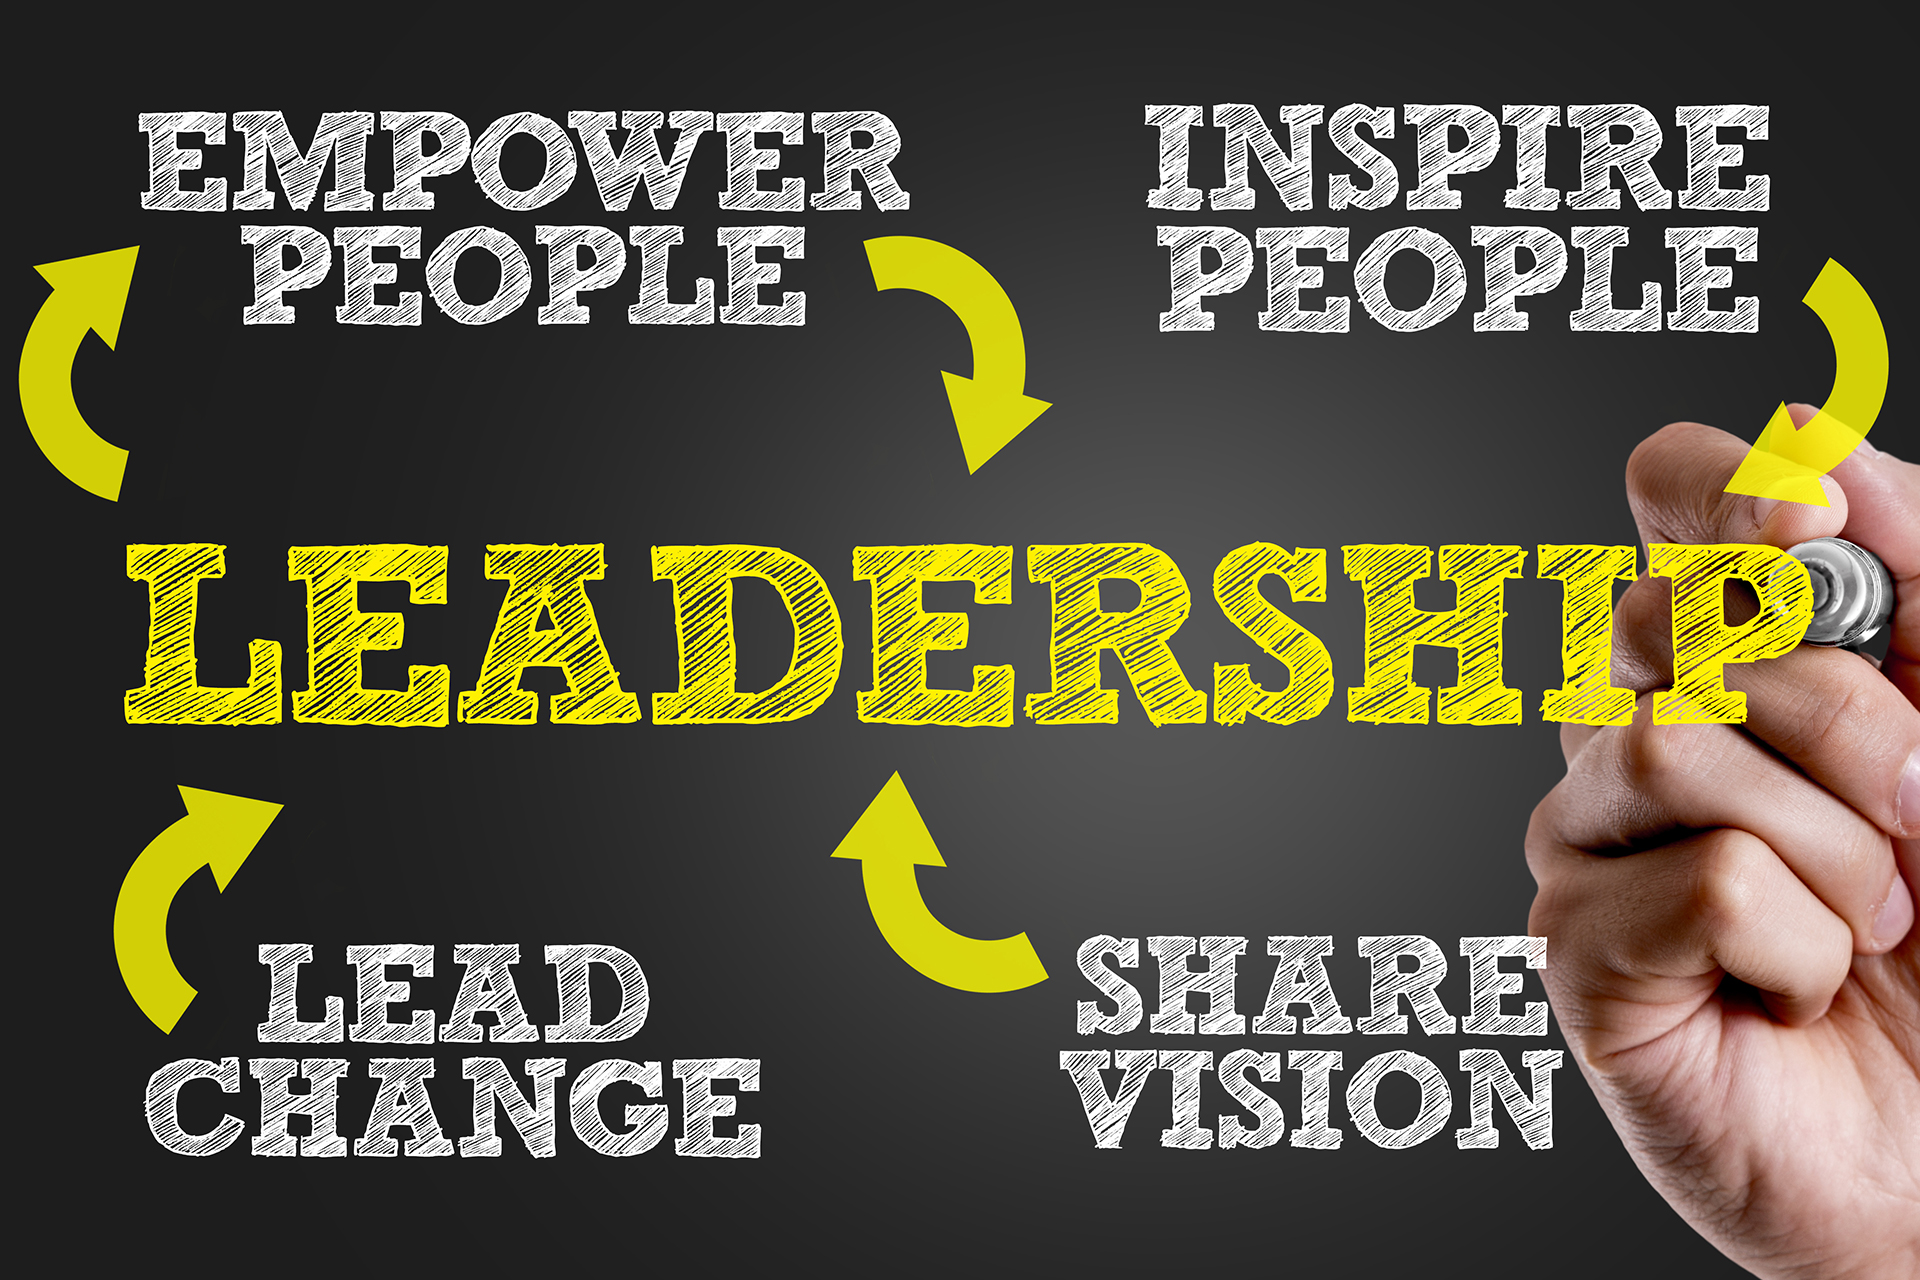 Nursing leadership skills include leading change, sharing vision, empowering people and inspiring others